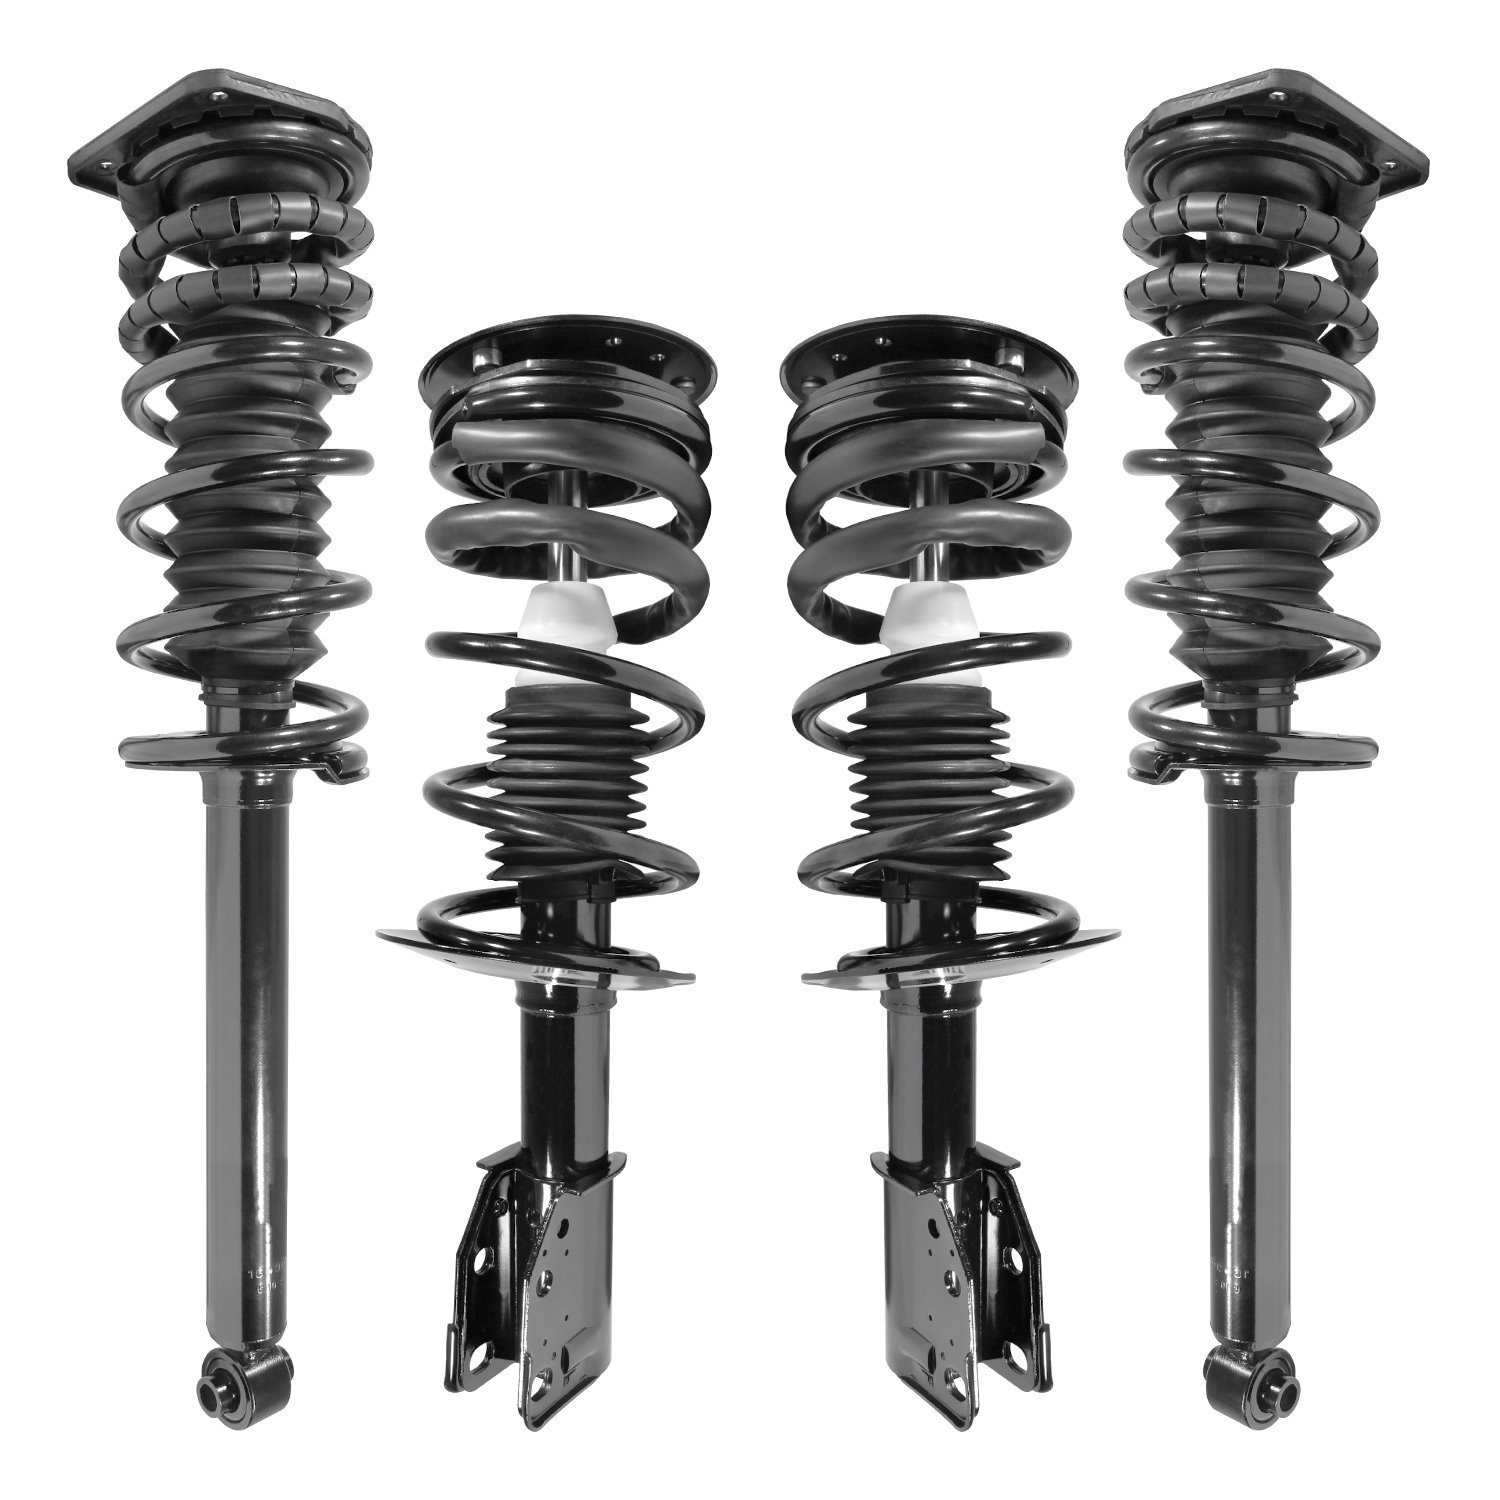 4-11150-15030-001 Front & Rear Suspension Strut & Coil Spring Assembly Kit Fits Select Chevy Cavalier, Pontiac Sunfire